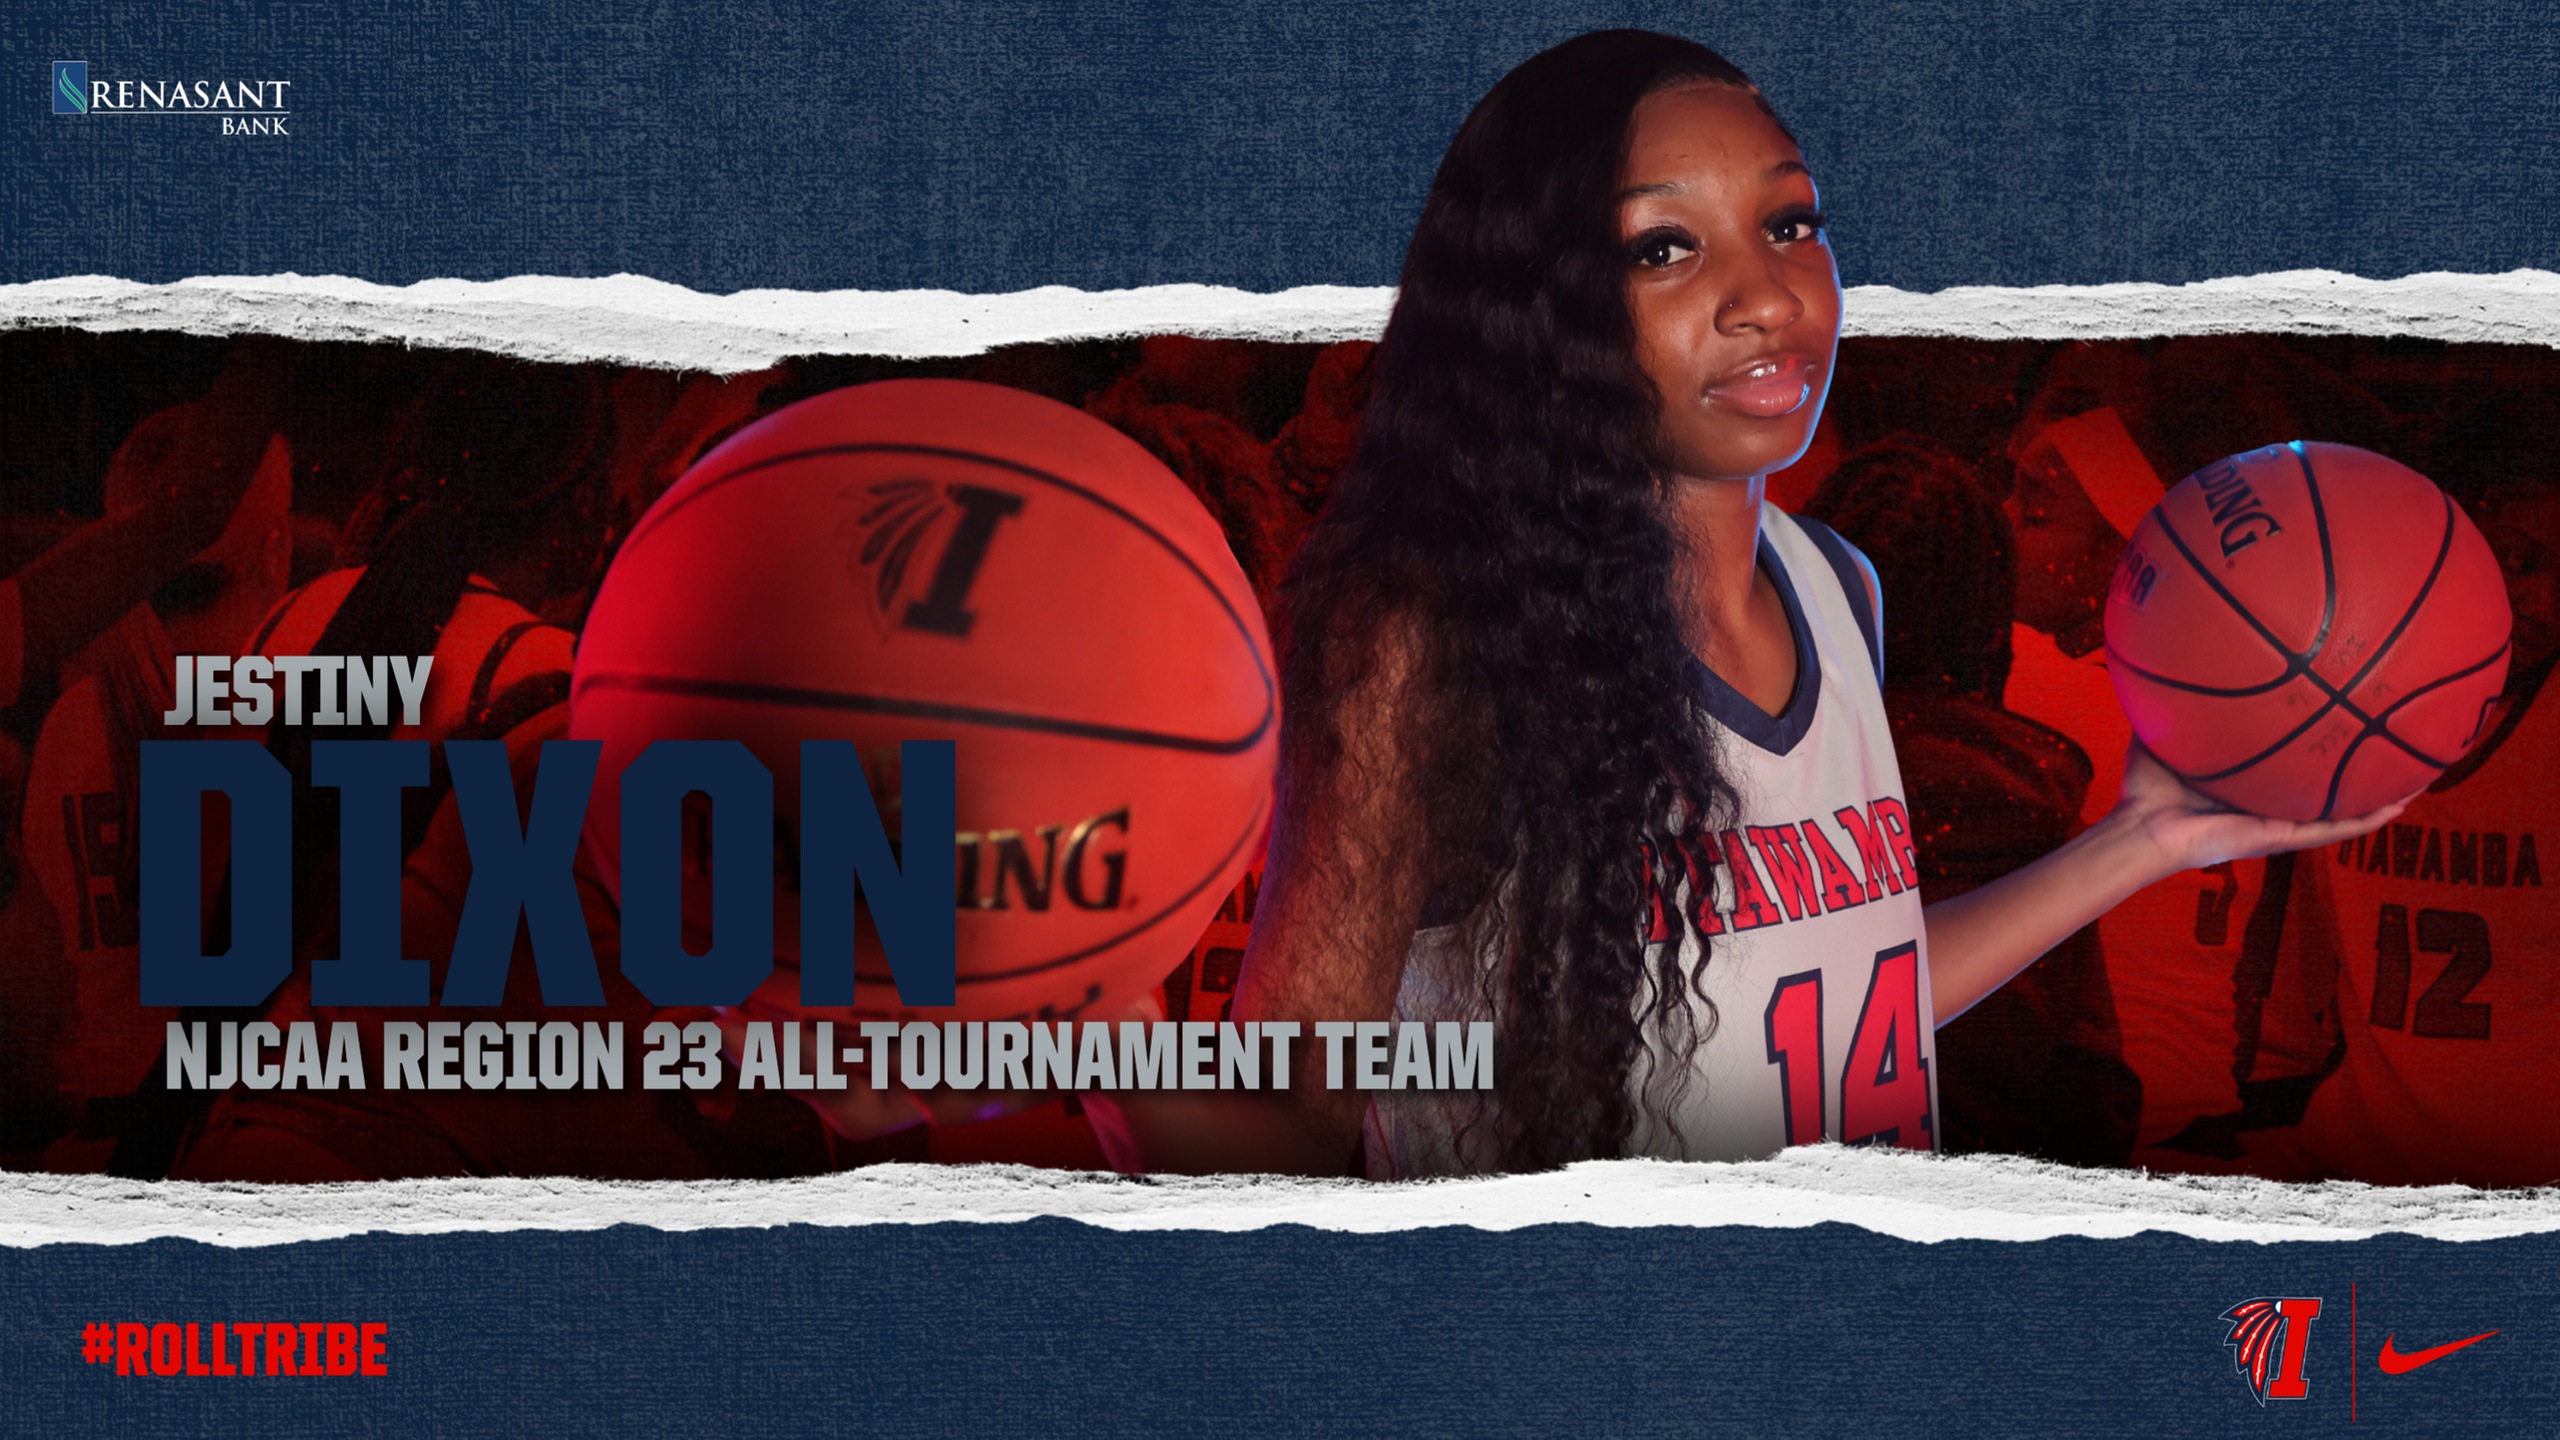 Dixon selected to the NJCAA Region 23 All-Tournament Team